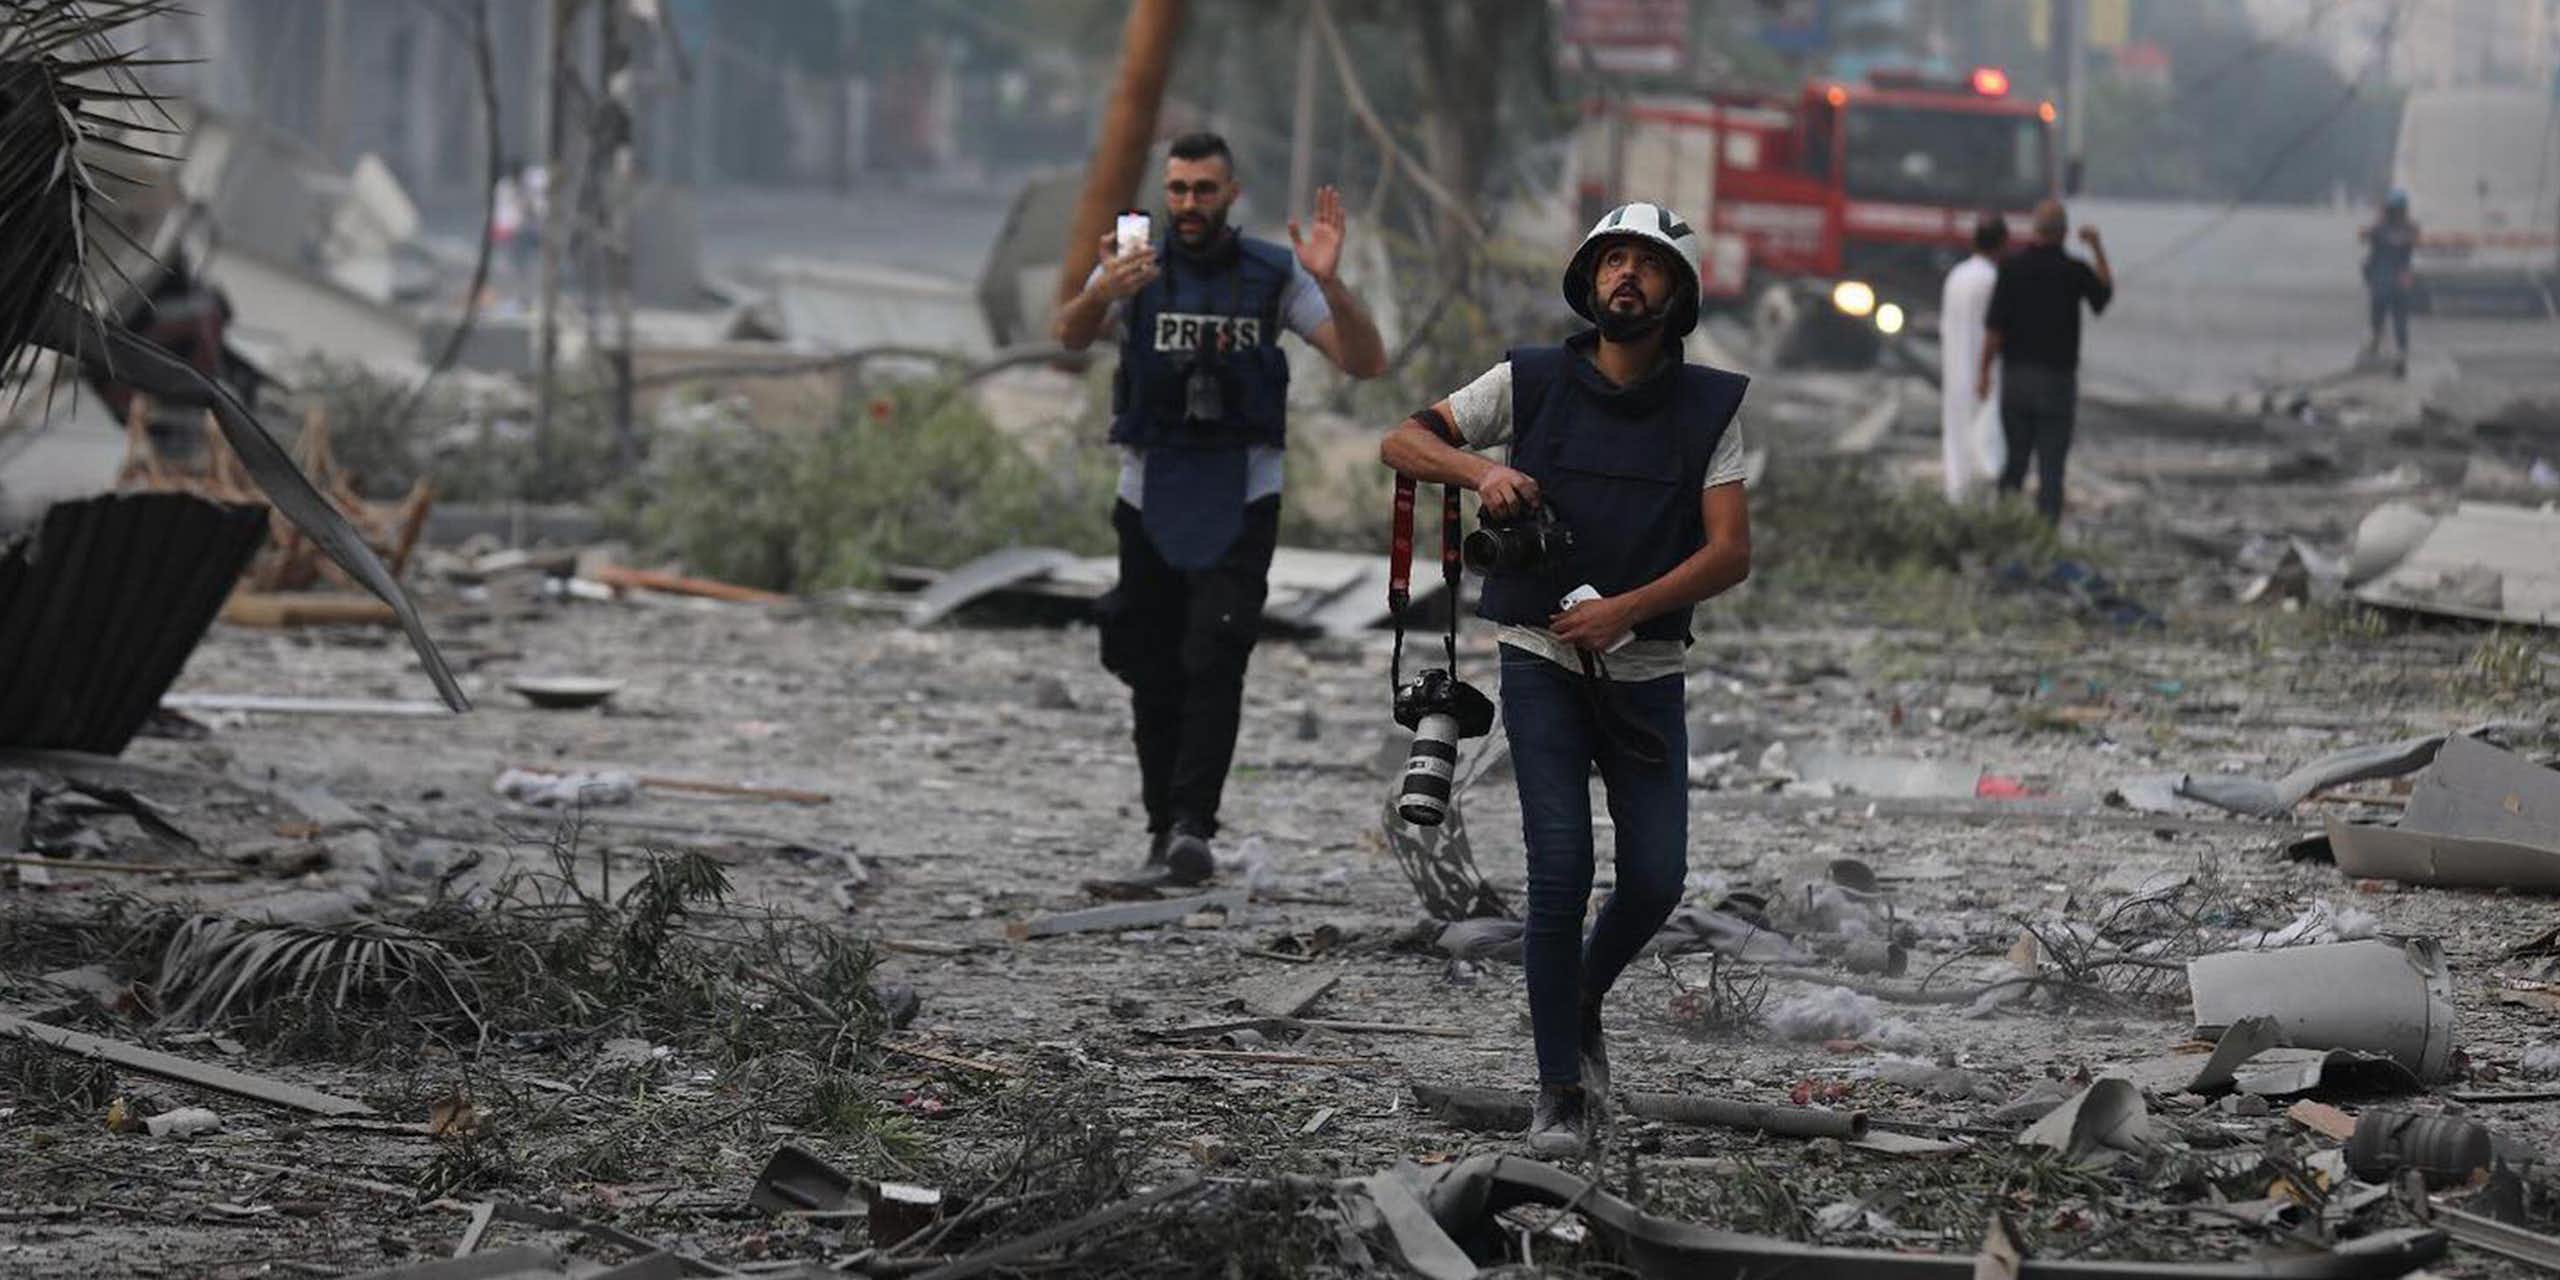 Two journalists walking through an area where buildings have been destroyed in Gaza.